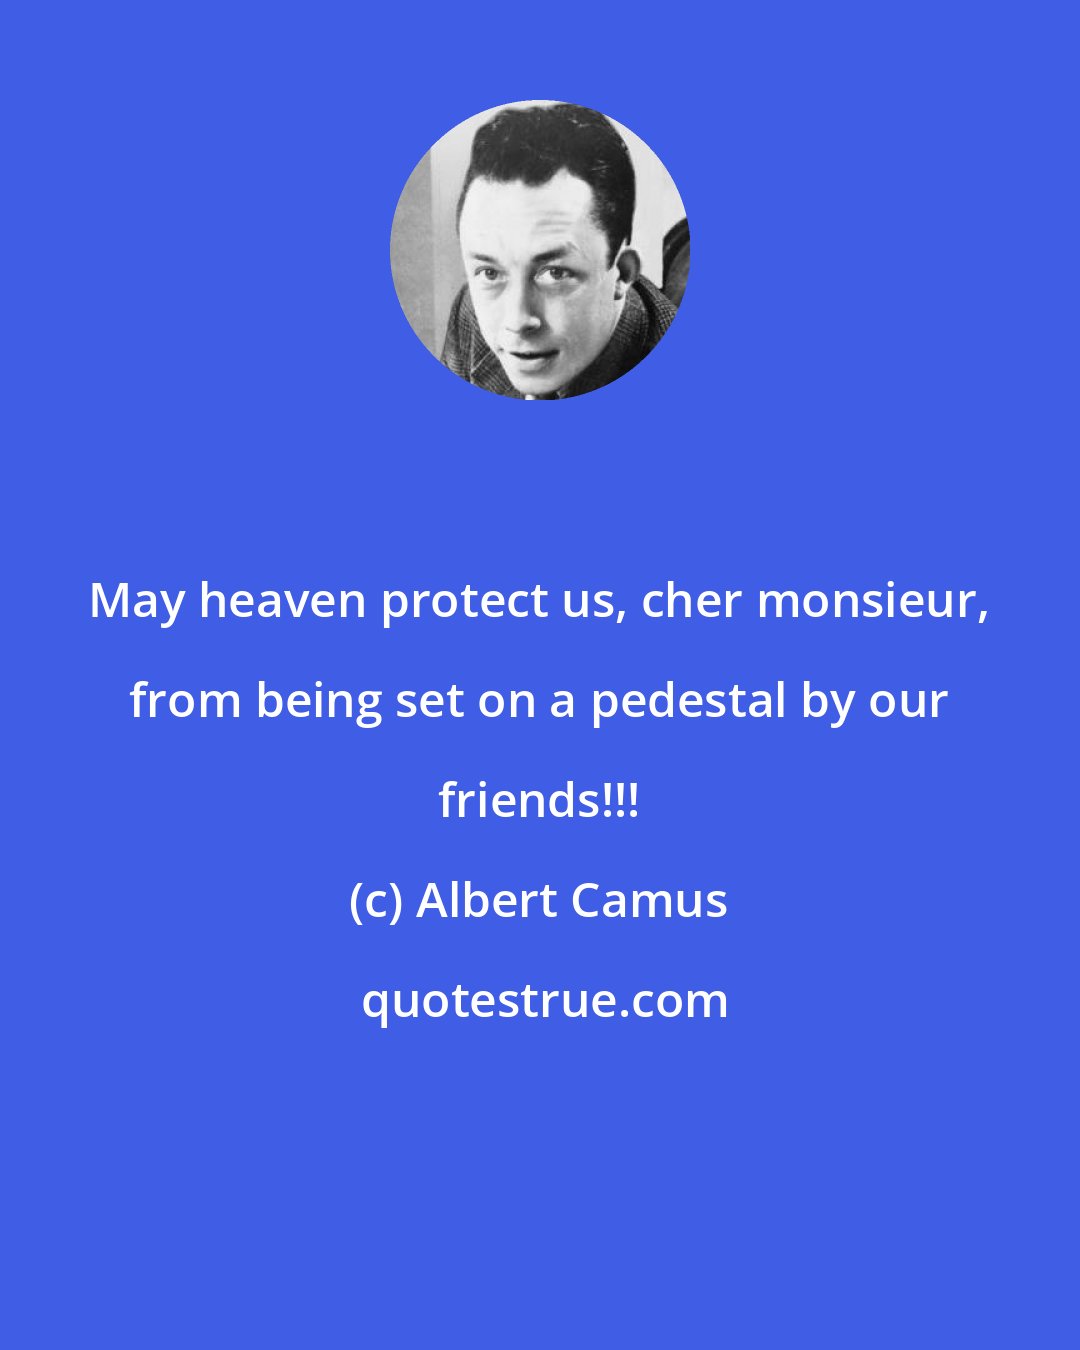 Albert Camus: May heaven protect us, cher monsieur, from being set on a pedestal by our friends!!!